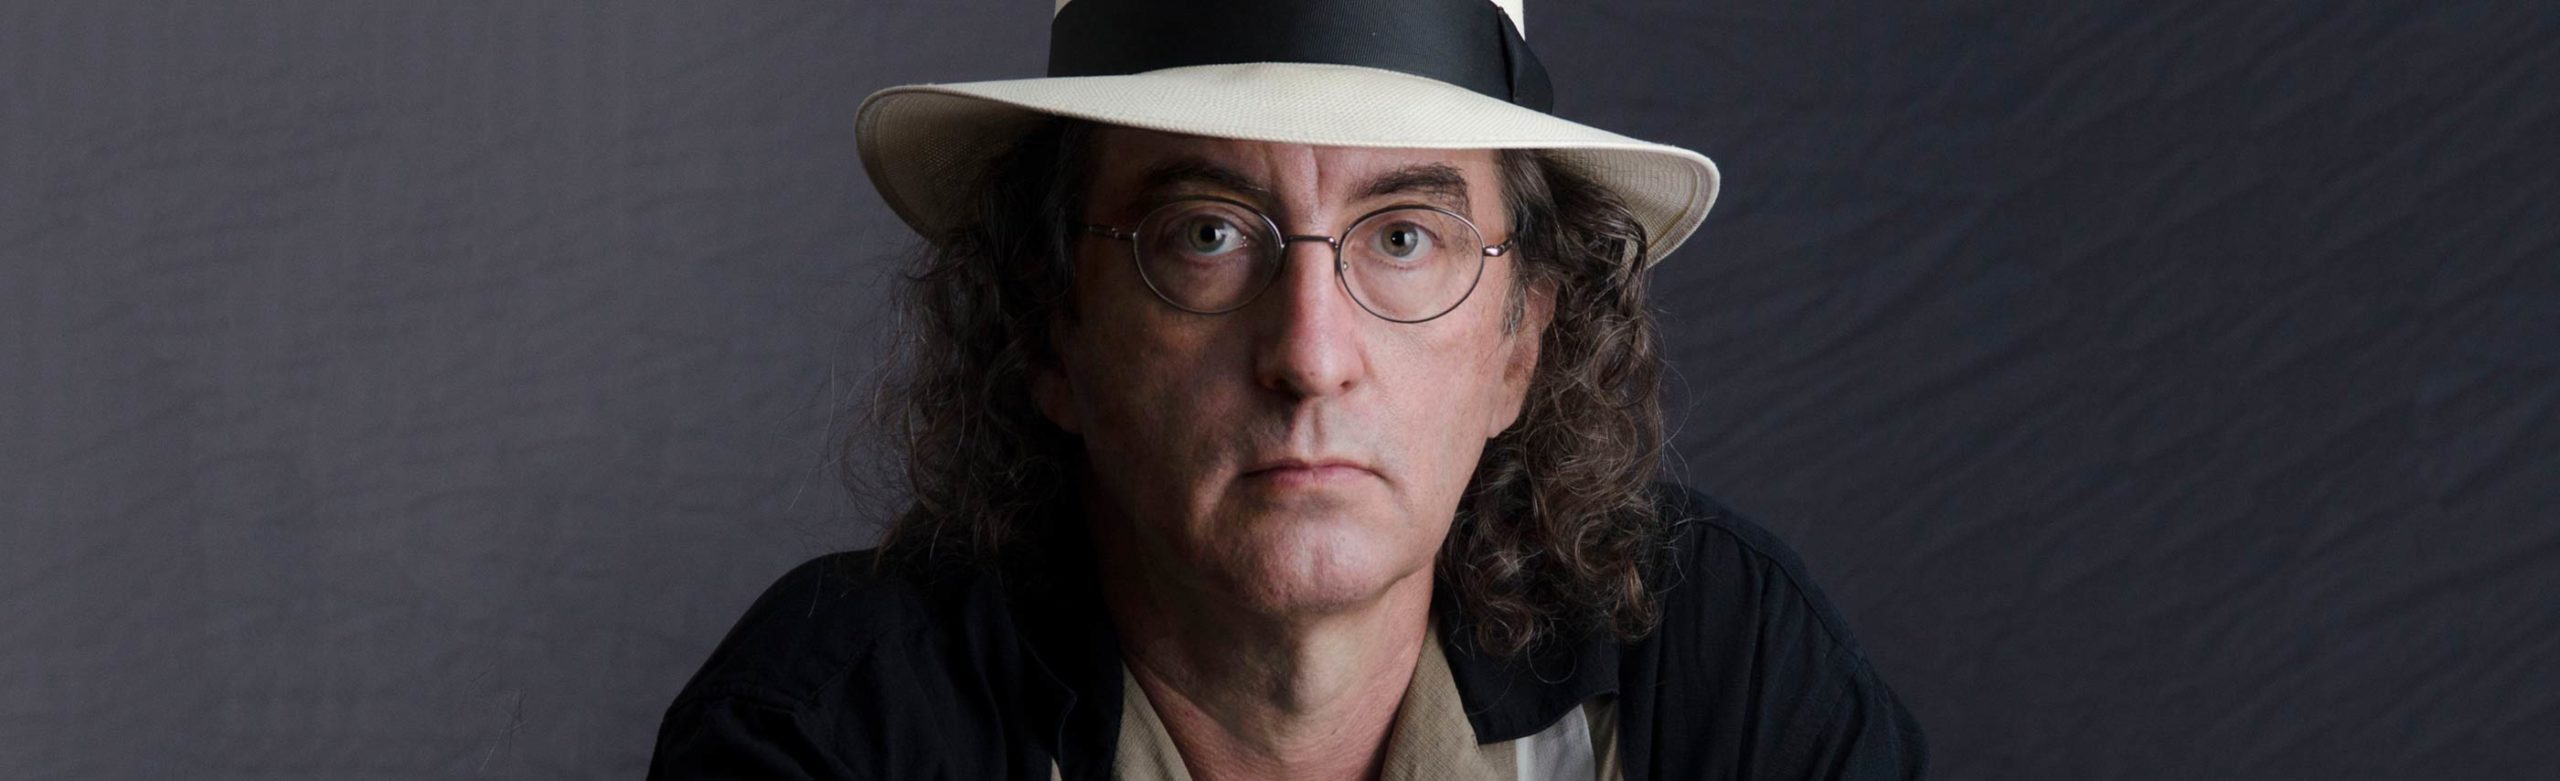 JUST ANNOUNCED: James McMurtry Returns to Missoula for Headlining Concert Image